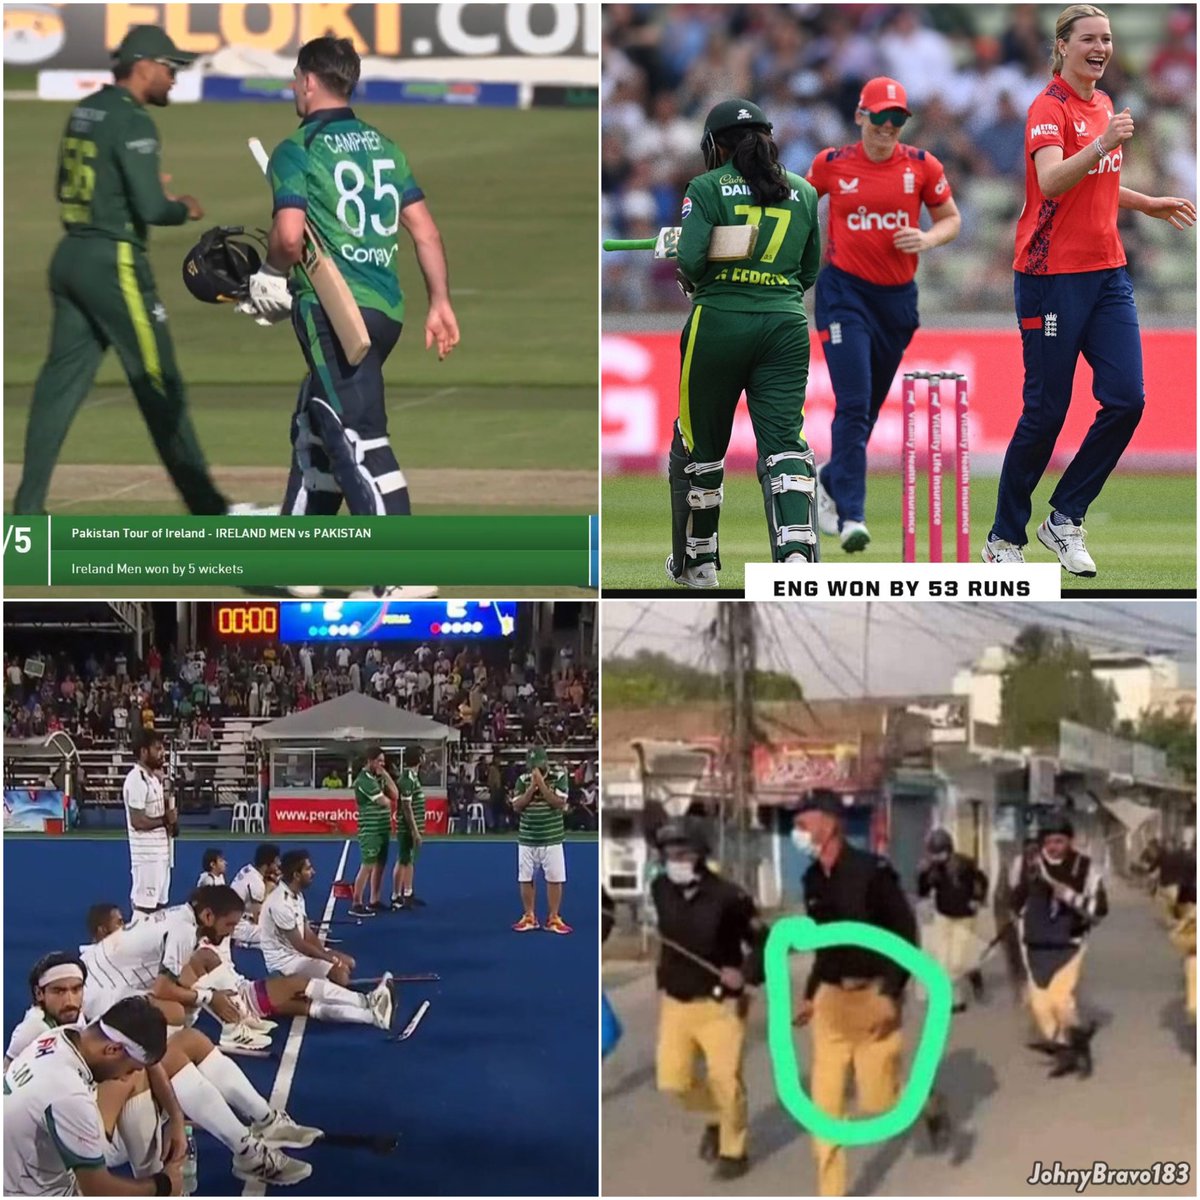 Pakistan in last 24 hours:

- Cricket team lost to Ireland (Men's)
- Cricket team lost to England (Women's)
- Hockey team lost to Japan
- Army lost to Kashmiris

Universal surrender nation 🤣